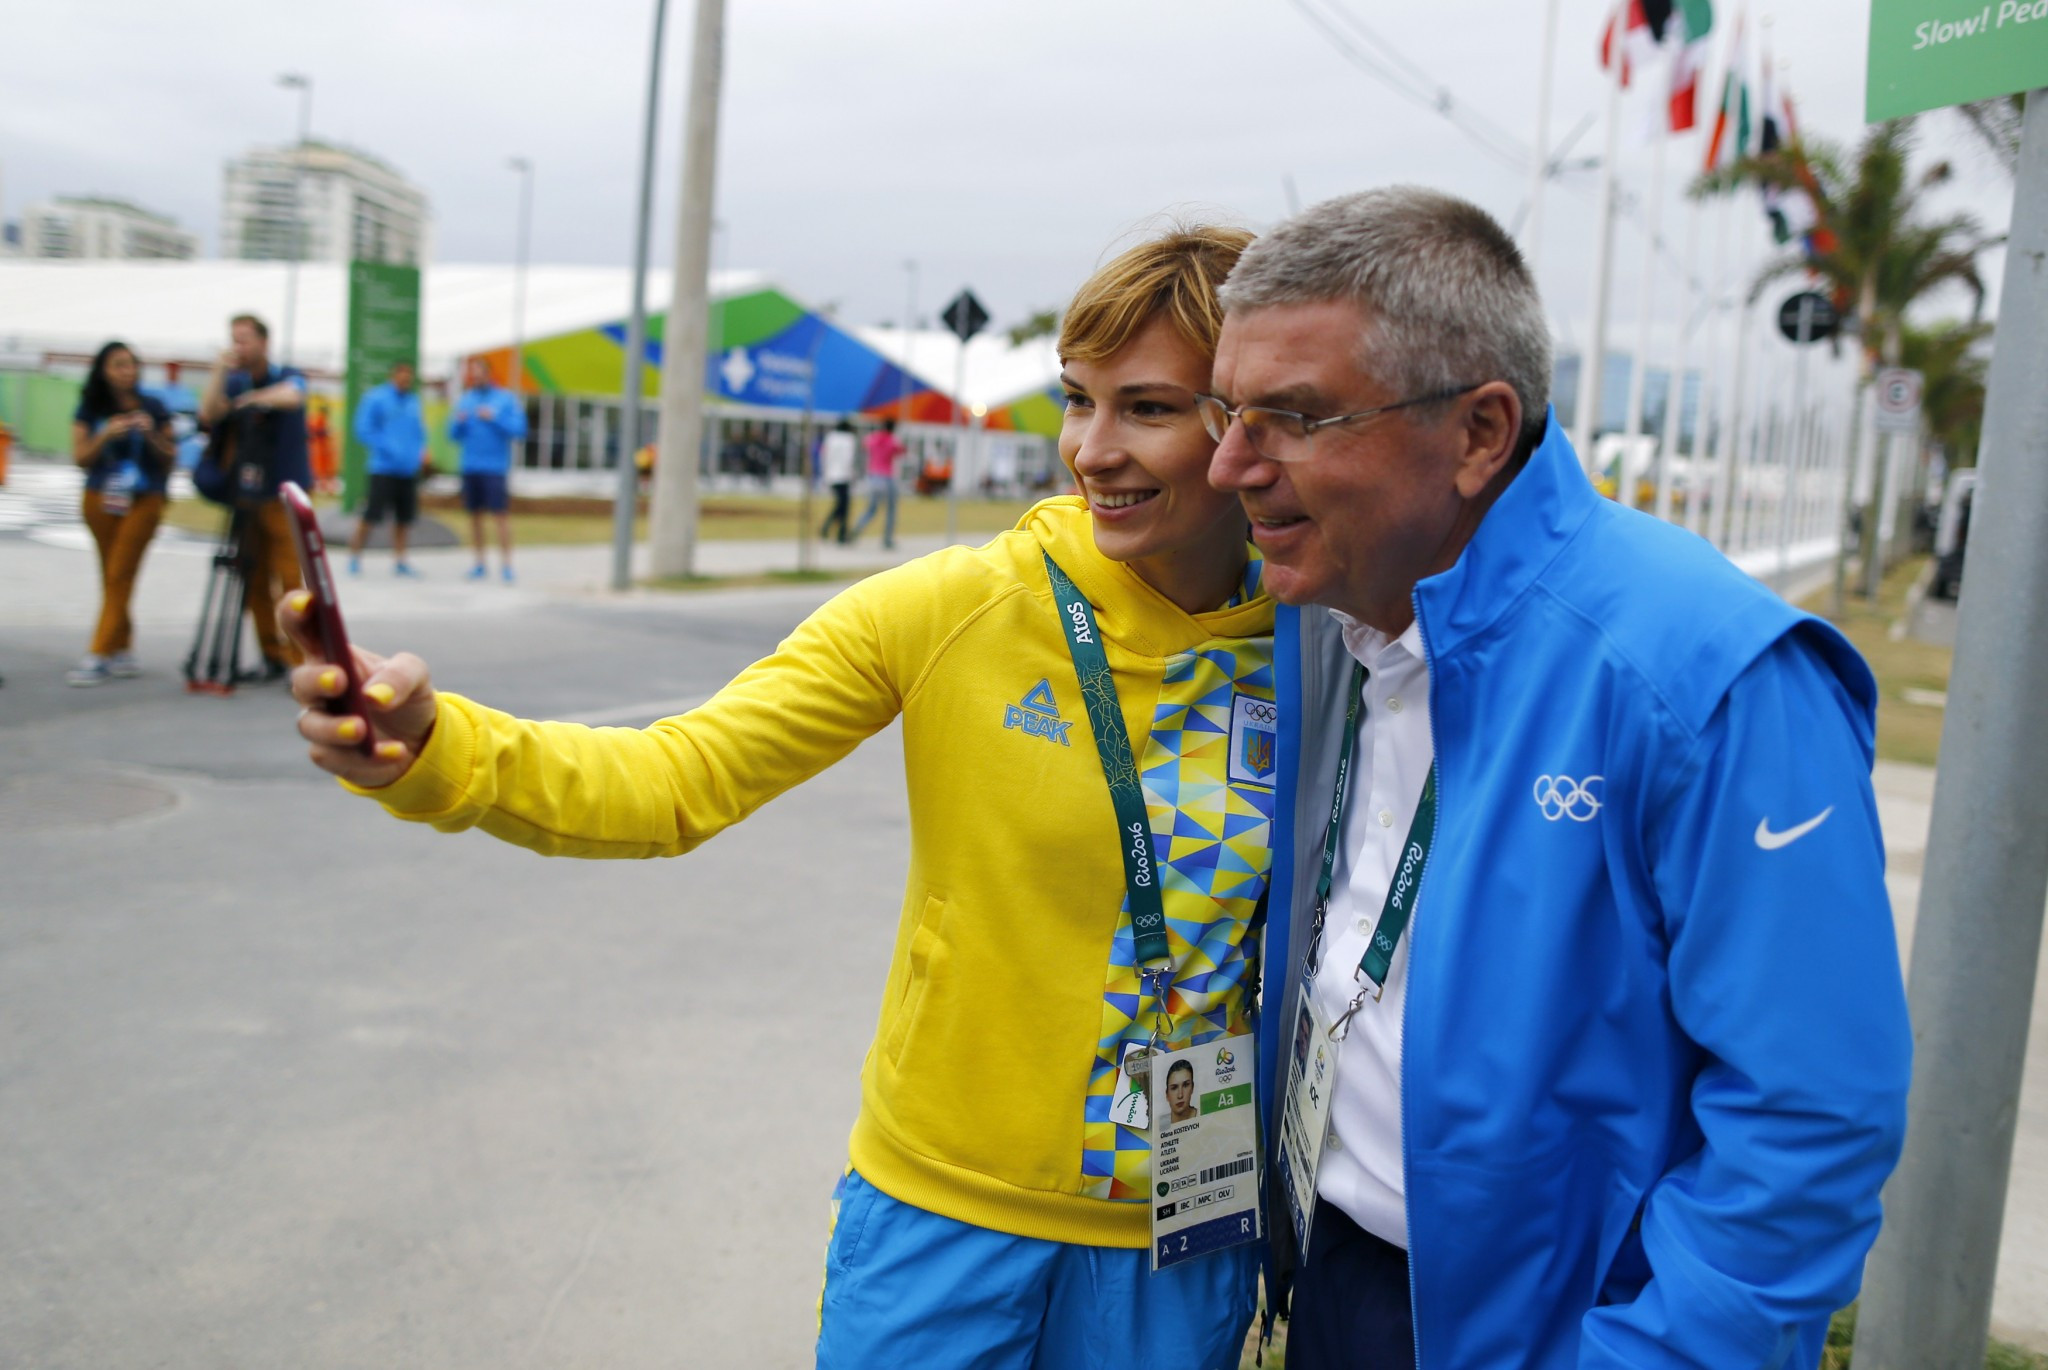 Ukraine's Olena Kostevych, pictured alongside International Olympic Committee President Thomas Bach, is among the members of the European Shooting Confederation Athletes' Commission ©Getty Images